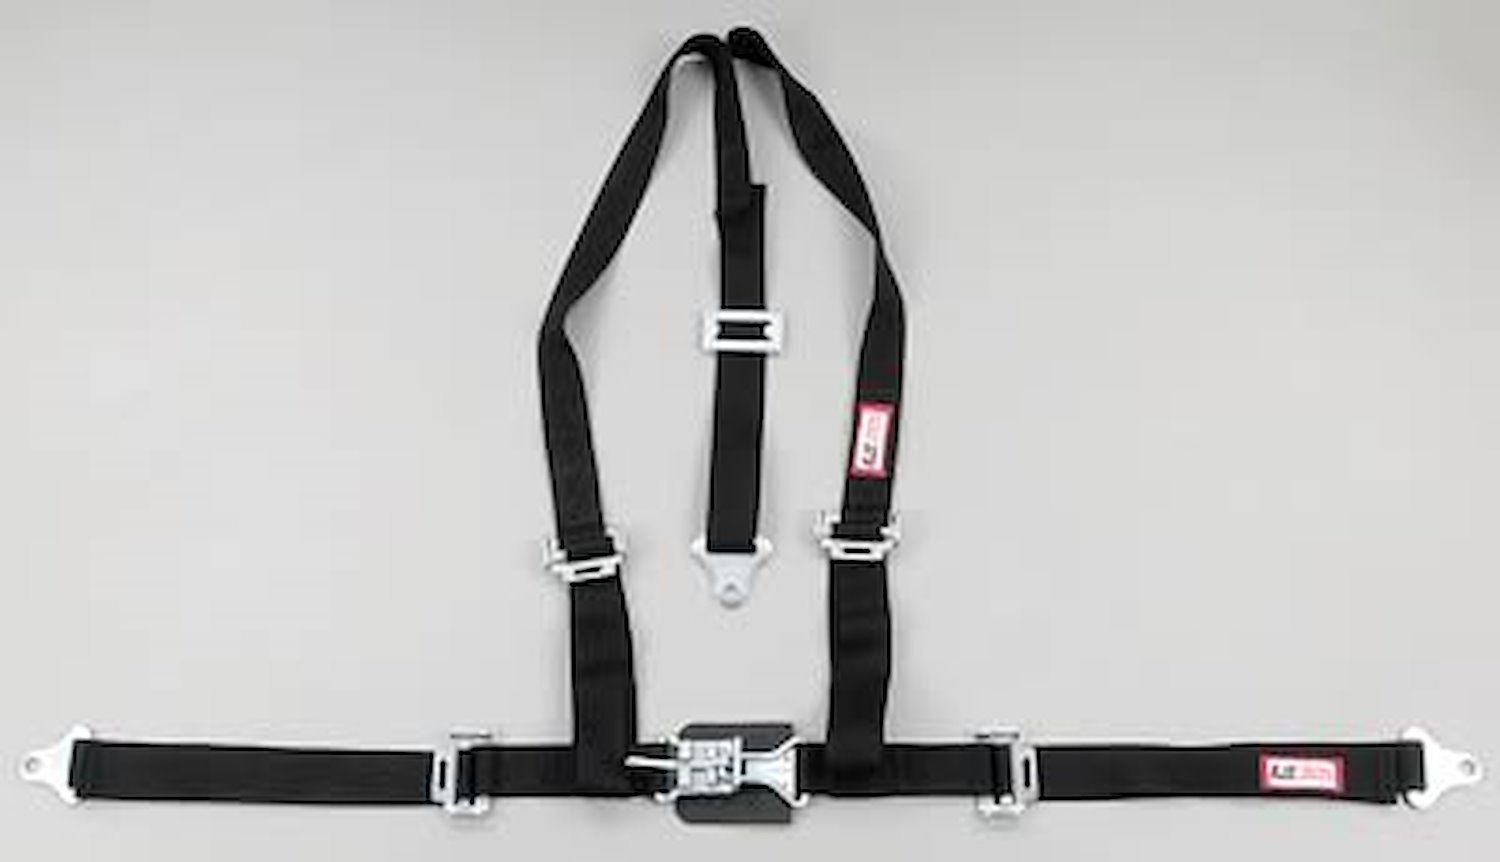 NON-SFI L&L HARNESS 2 PULL DOWN Lap Belt SEWN IN 2 S.H. V ROLL BAR Mount w/STERNUM STRAP ALL SNAP ENDS BLUE